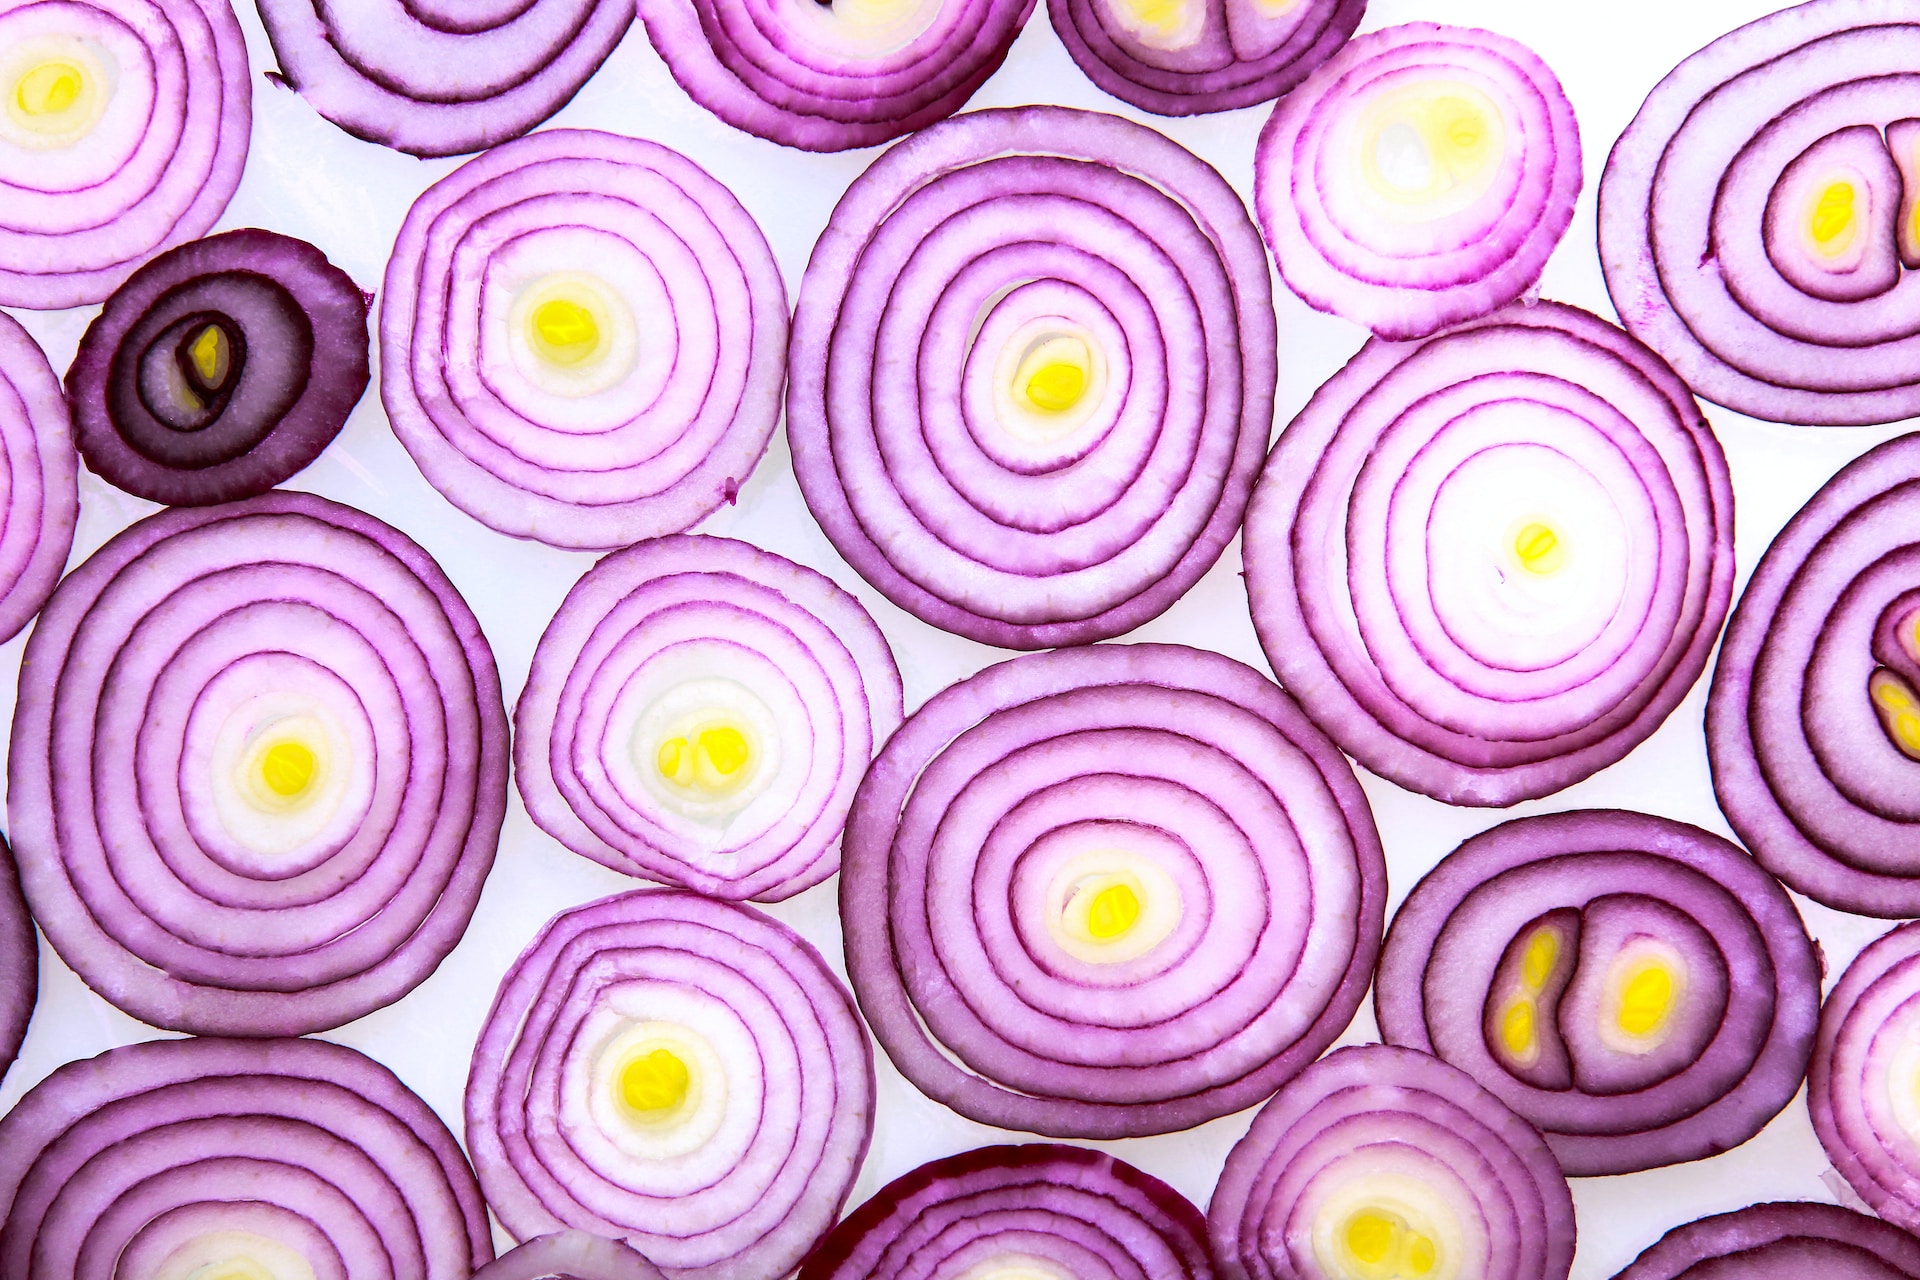 How to Chop an Onion – a Step-by-Step Guide